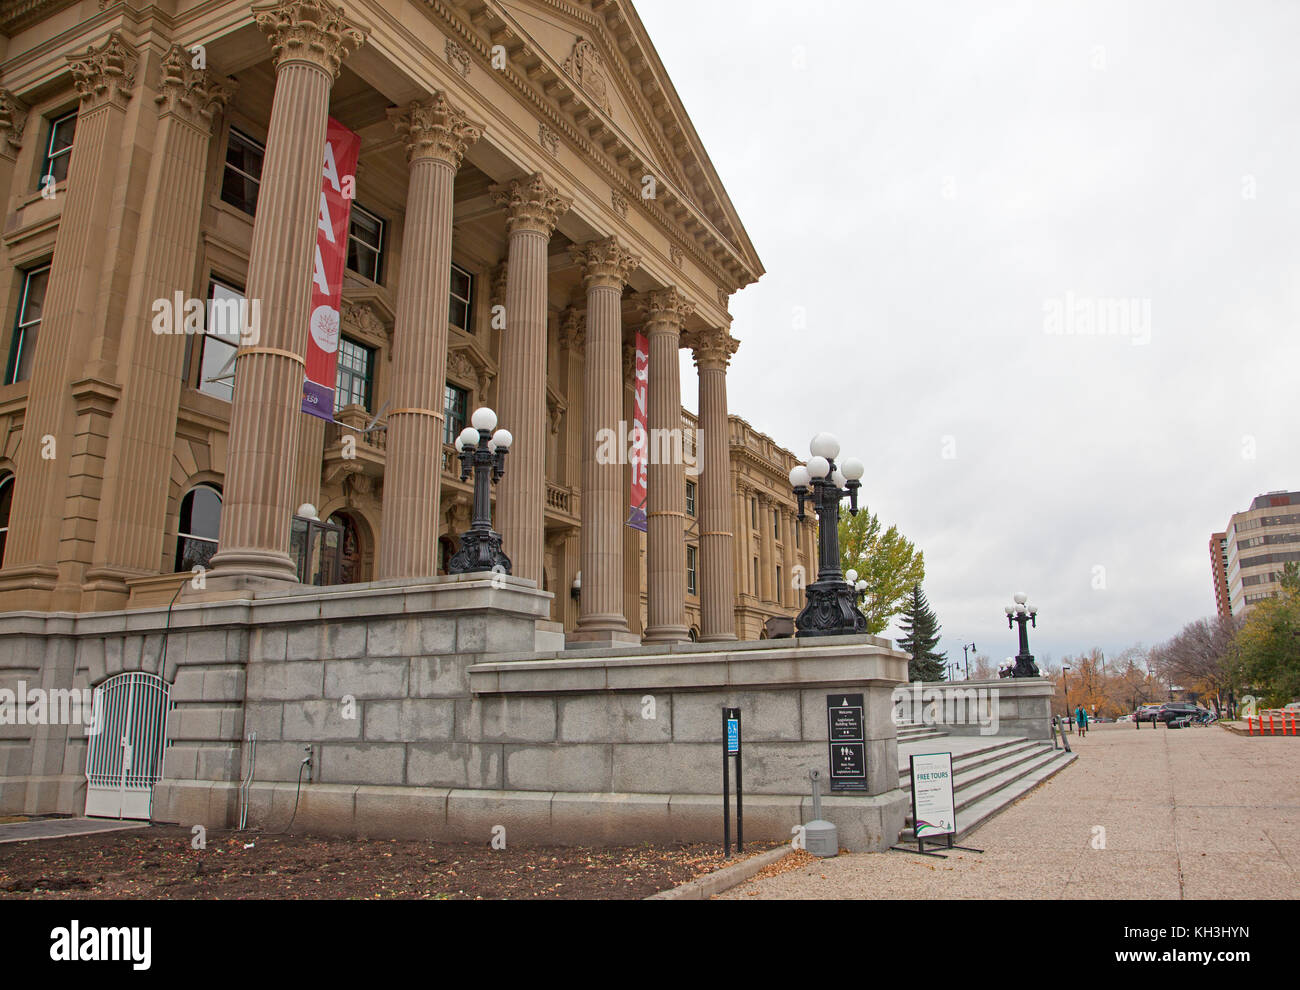 on October 6, 2017: signs for tours of the edmonton legislature building in Canada Stock Photo